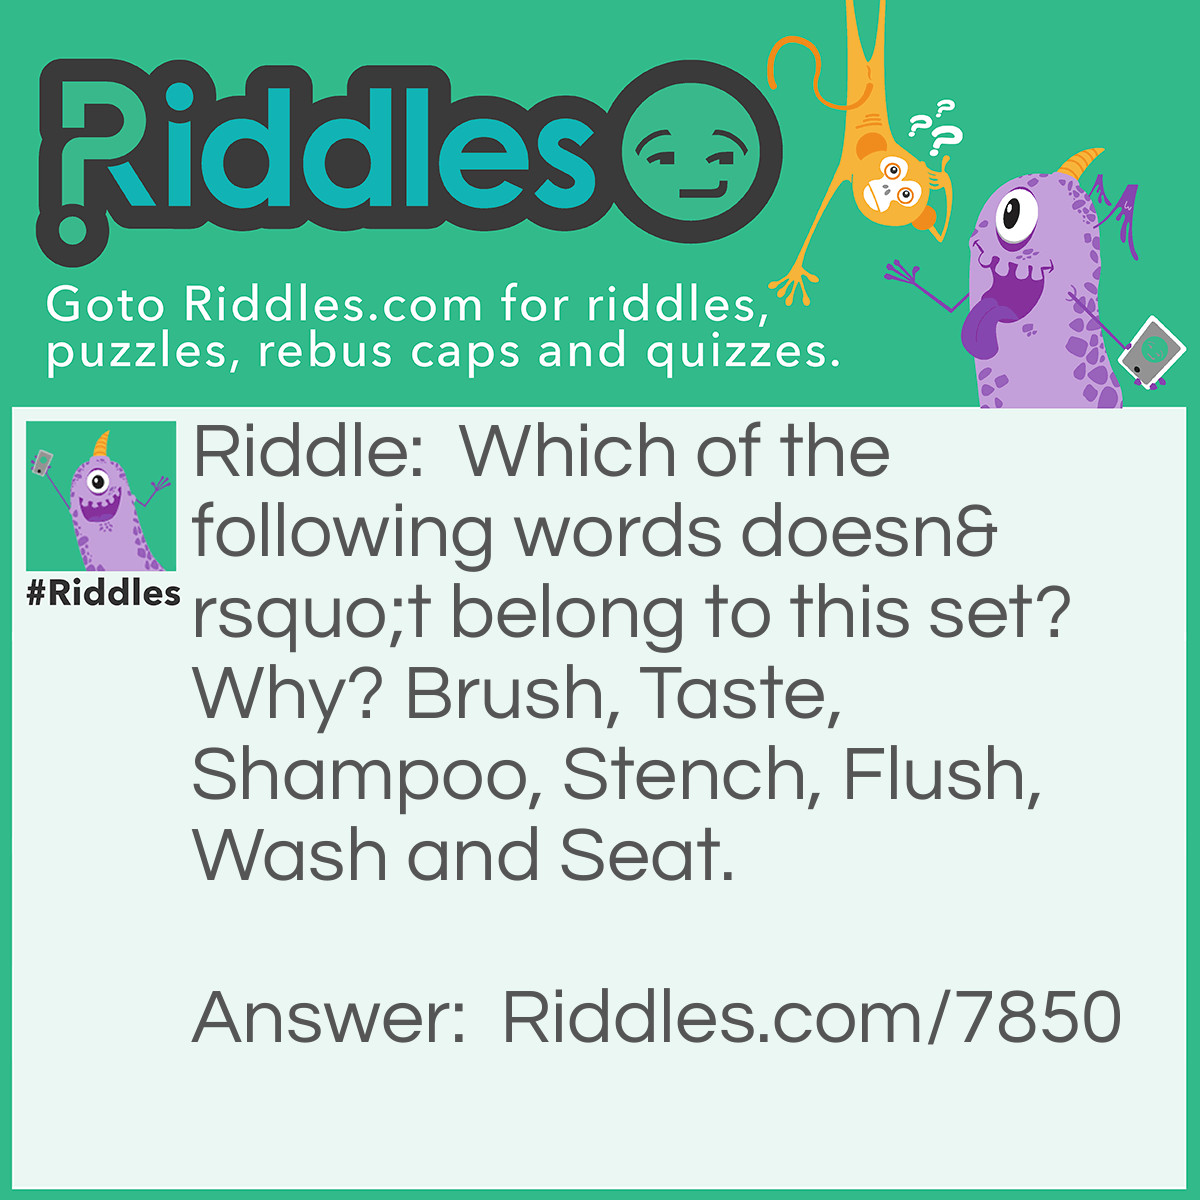 Riddle: Which of the following words doesn't belong to this set? Why? Brush, Taste, Shampoo, Stench, Flush, Wash and Seat. Answer: Stench. You can brush, taste, shampoo, flush, wash and seat people, but you can’t stench.